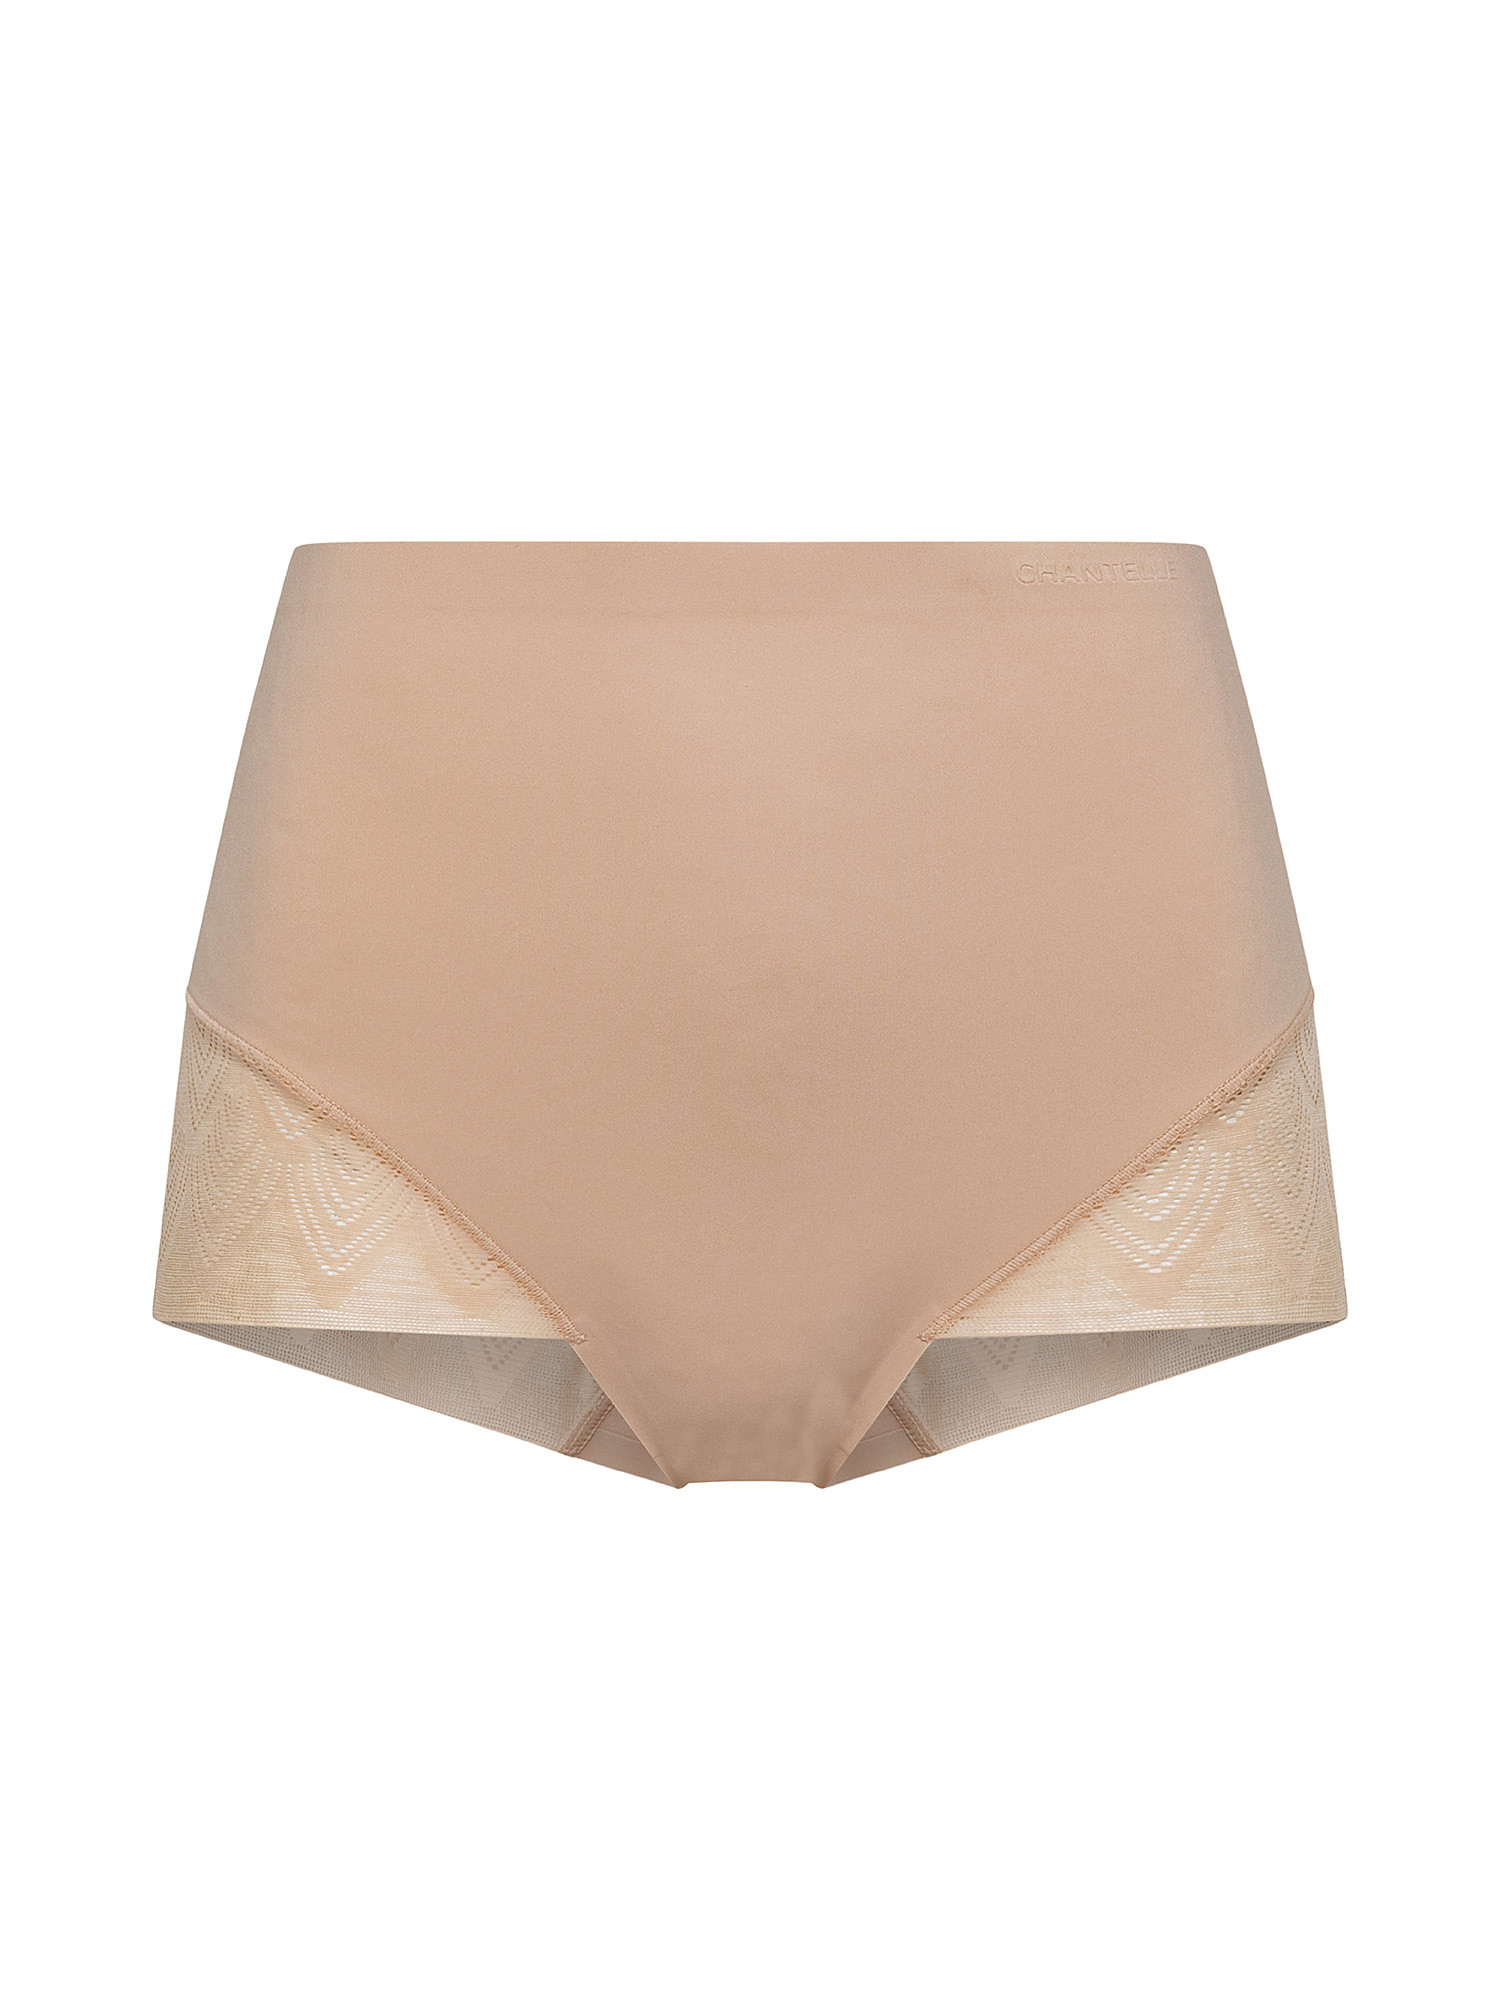 High-waisted culottes with a flat stomach effect, Beige, large image number 0